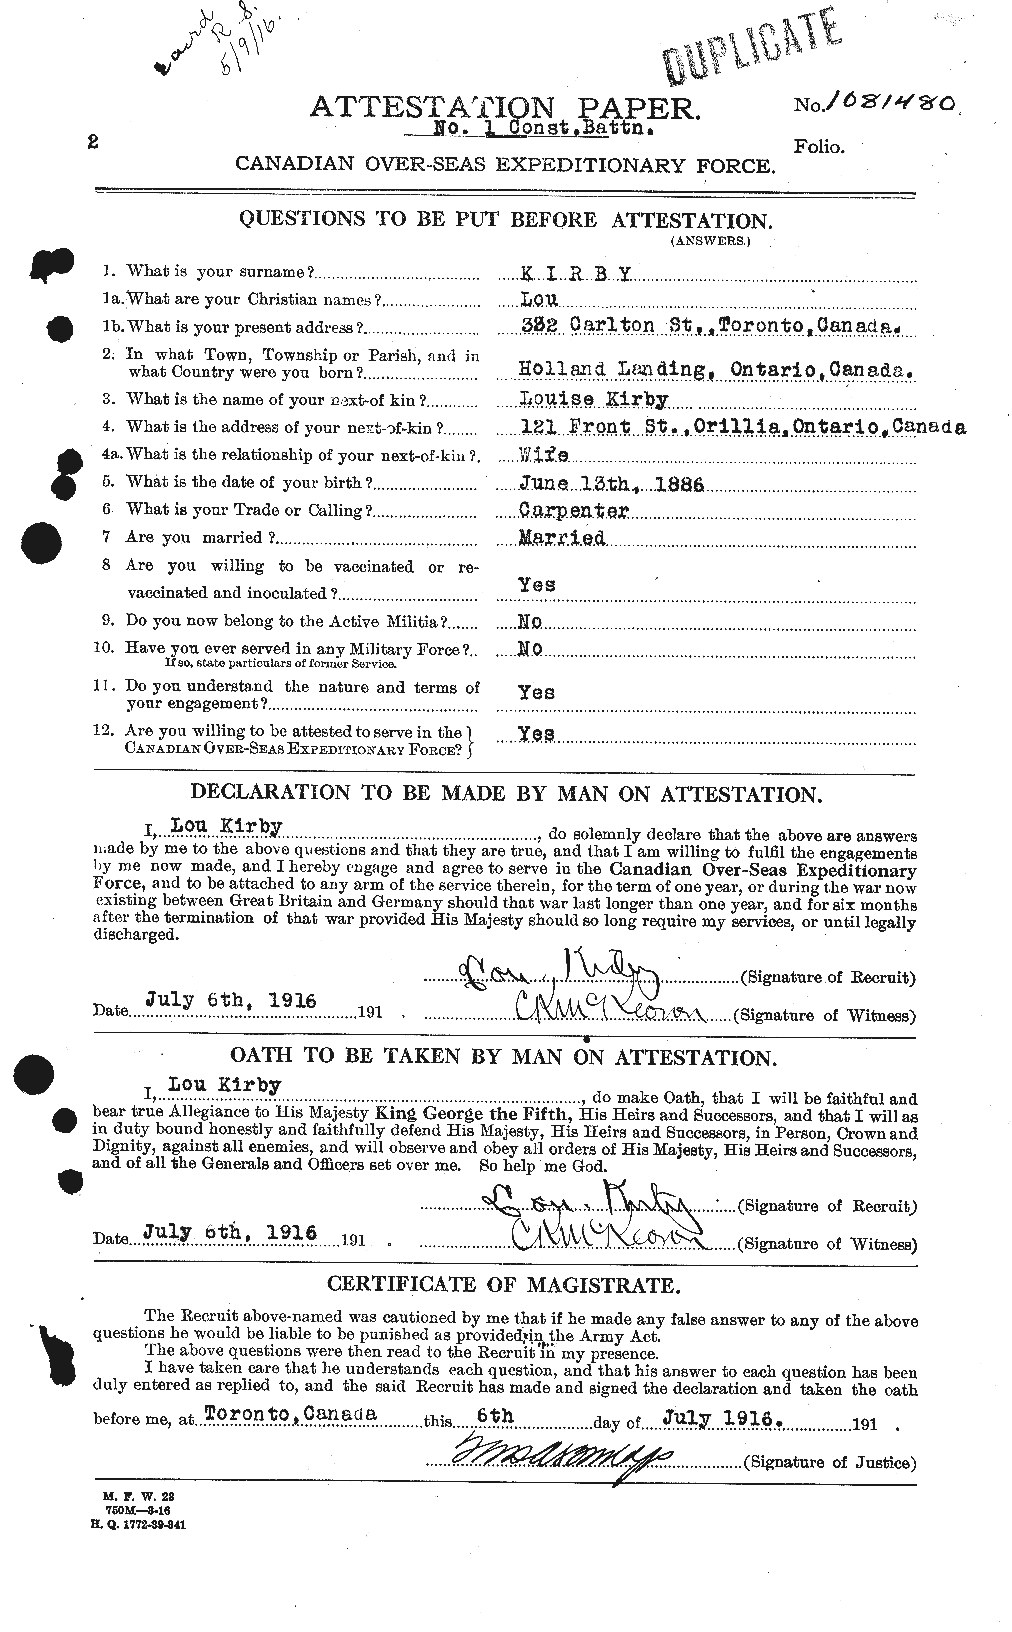 Personnel Records of the First World War - CEF 437251a